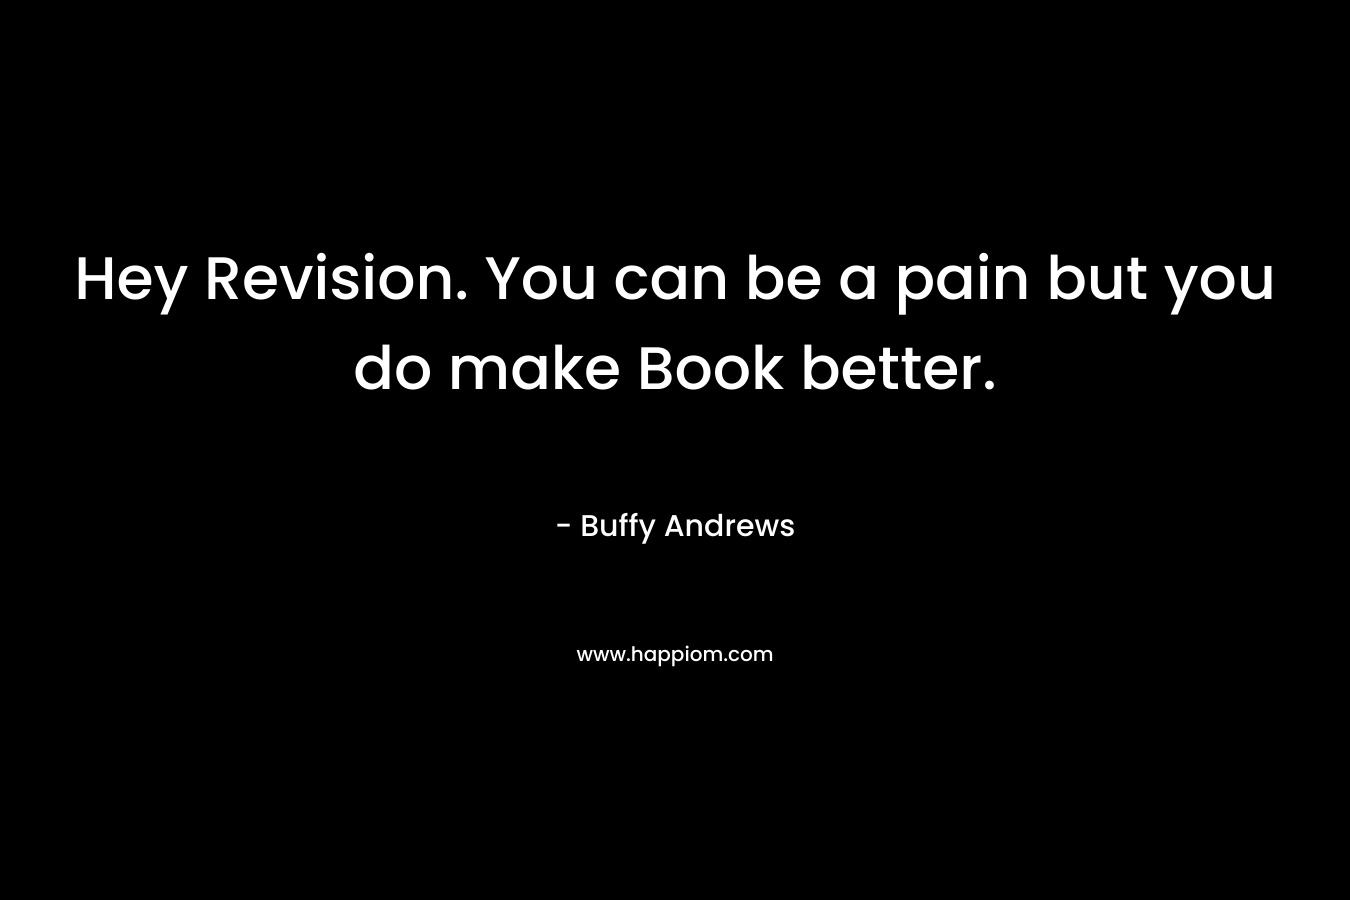 Hey Revision. You can be a pain but you do make Book better.